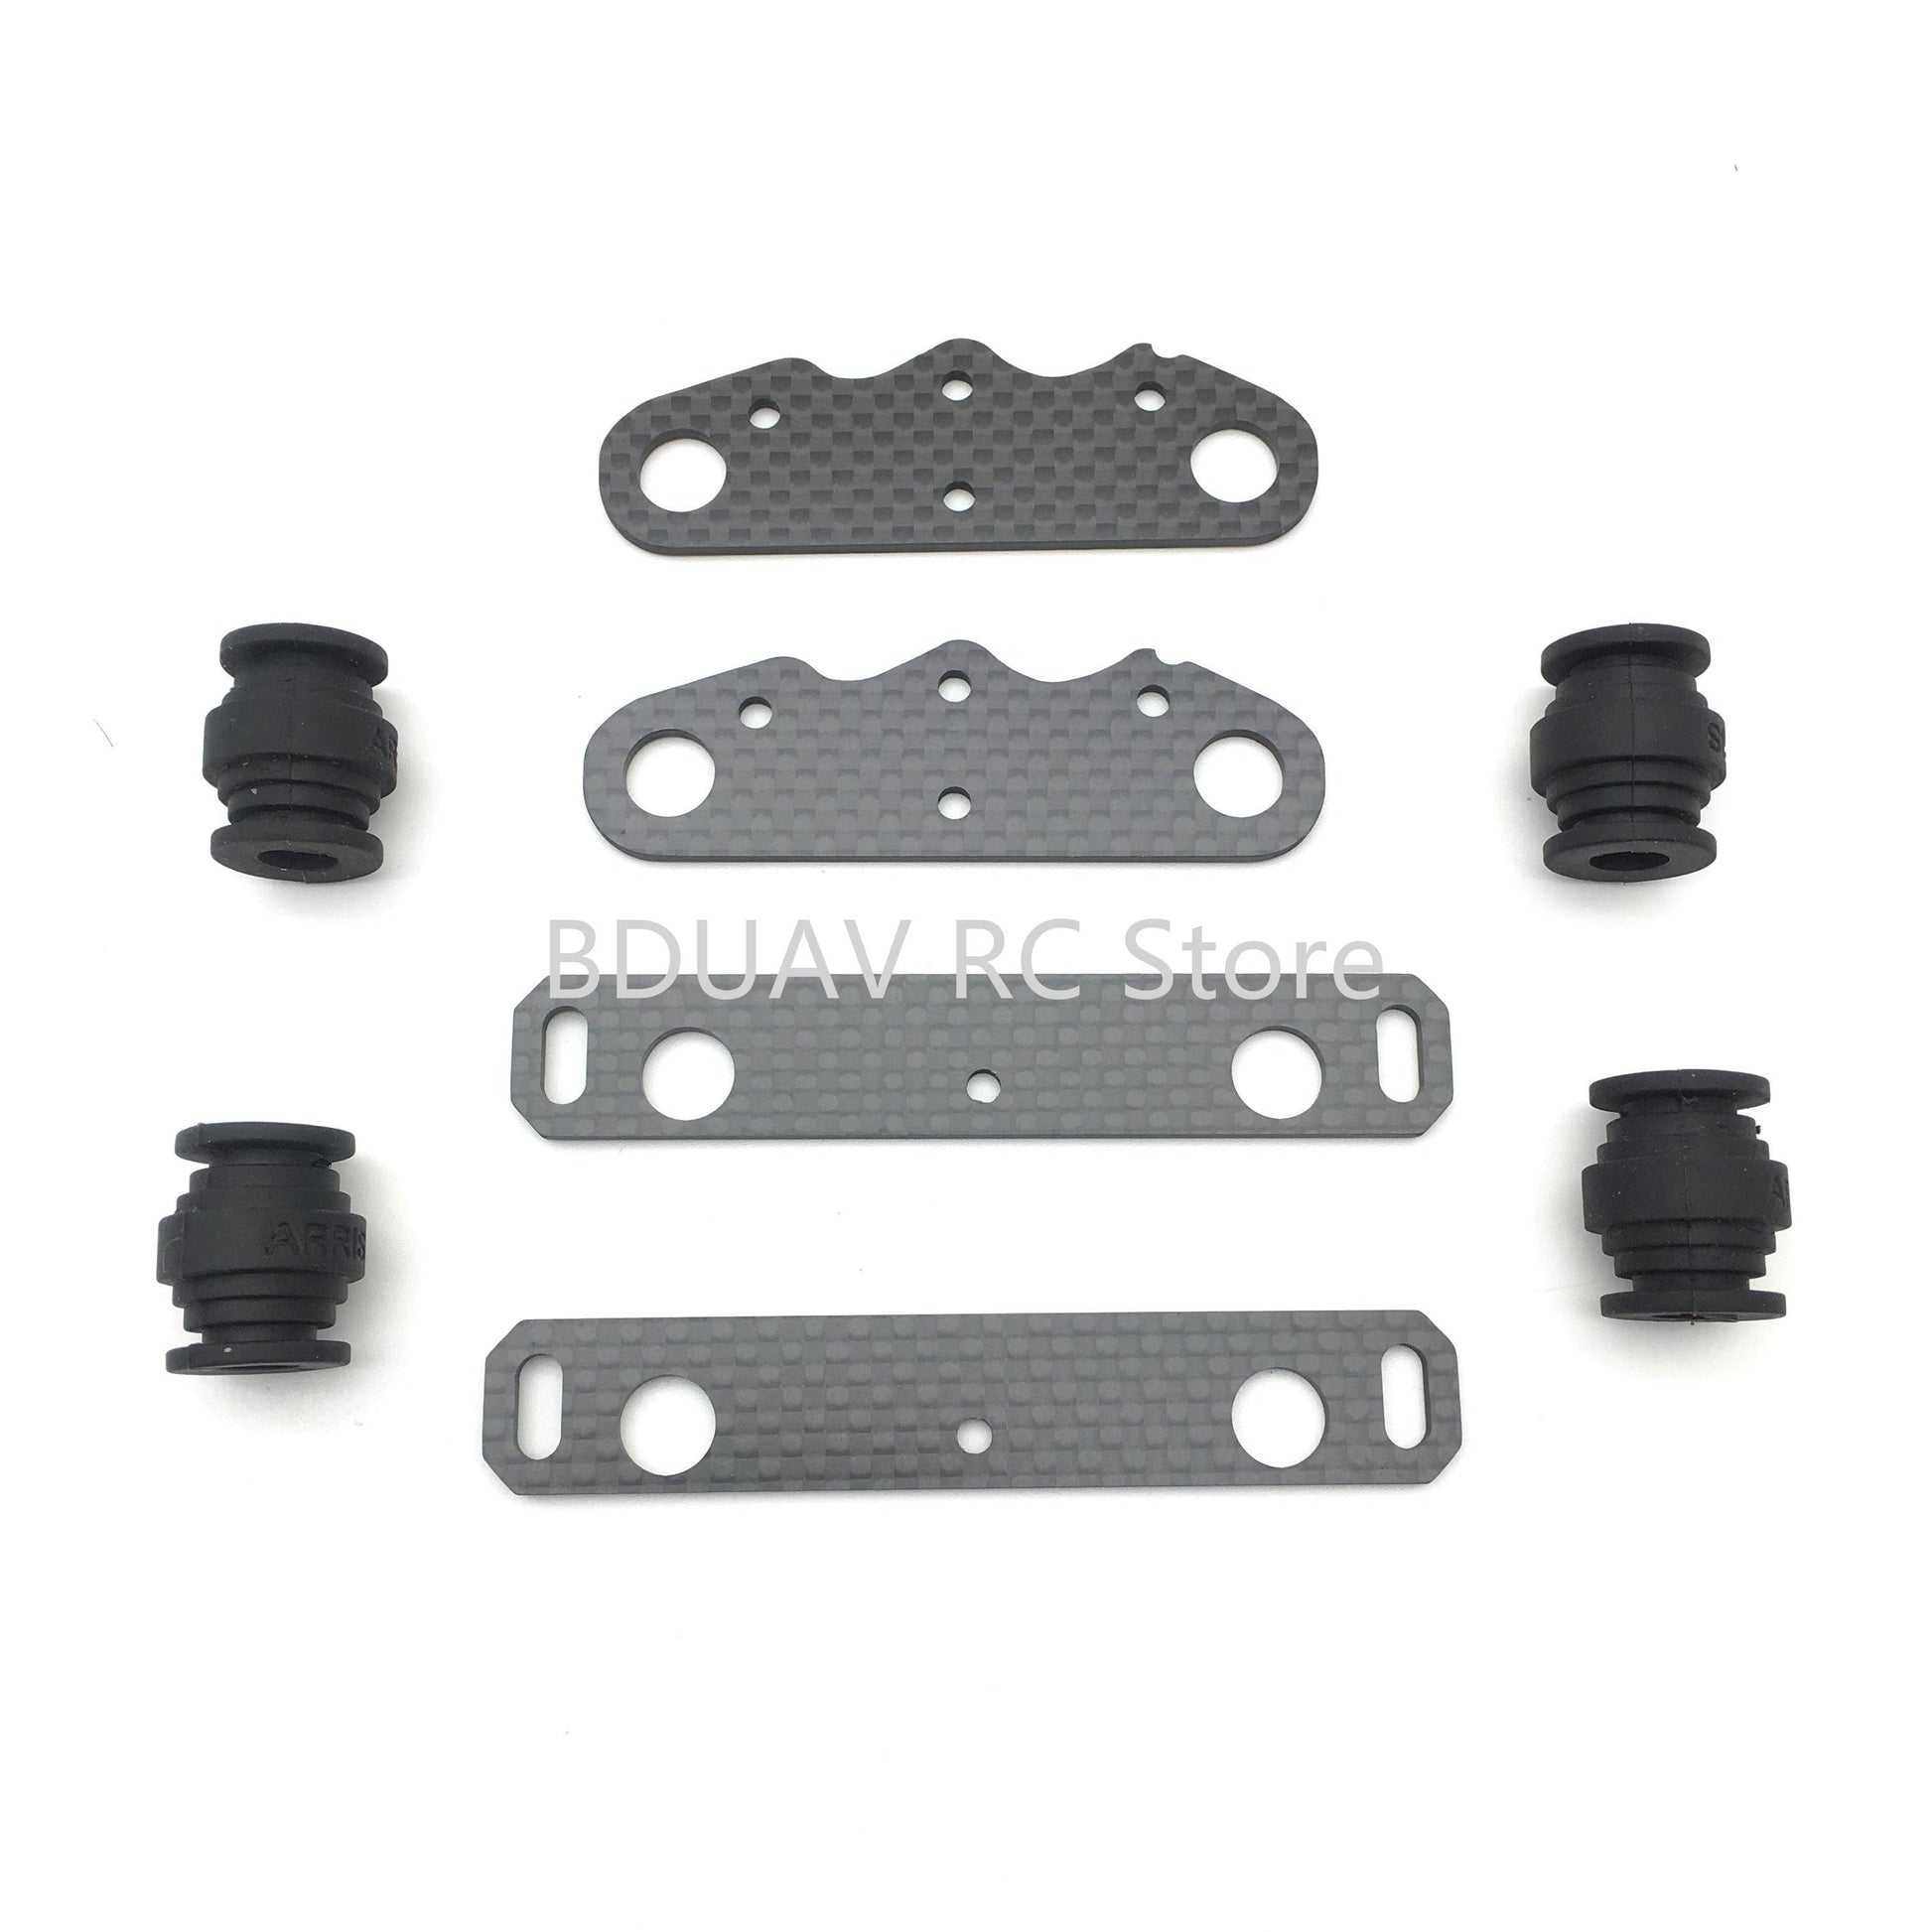 5L 8L brushless water pump Shock plate / mount for Agricultural spraying drone - RCDrone